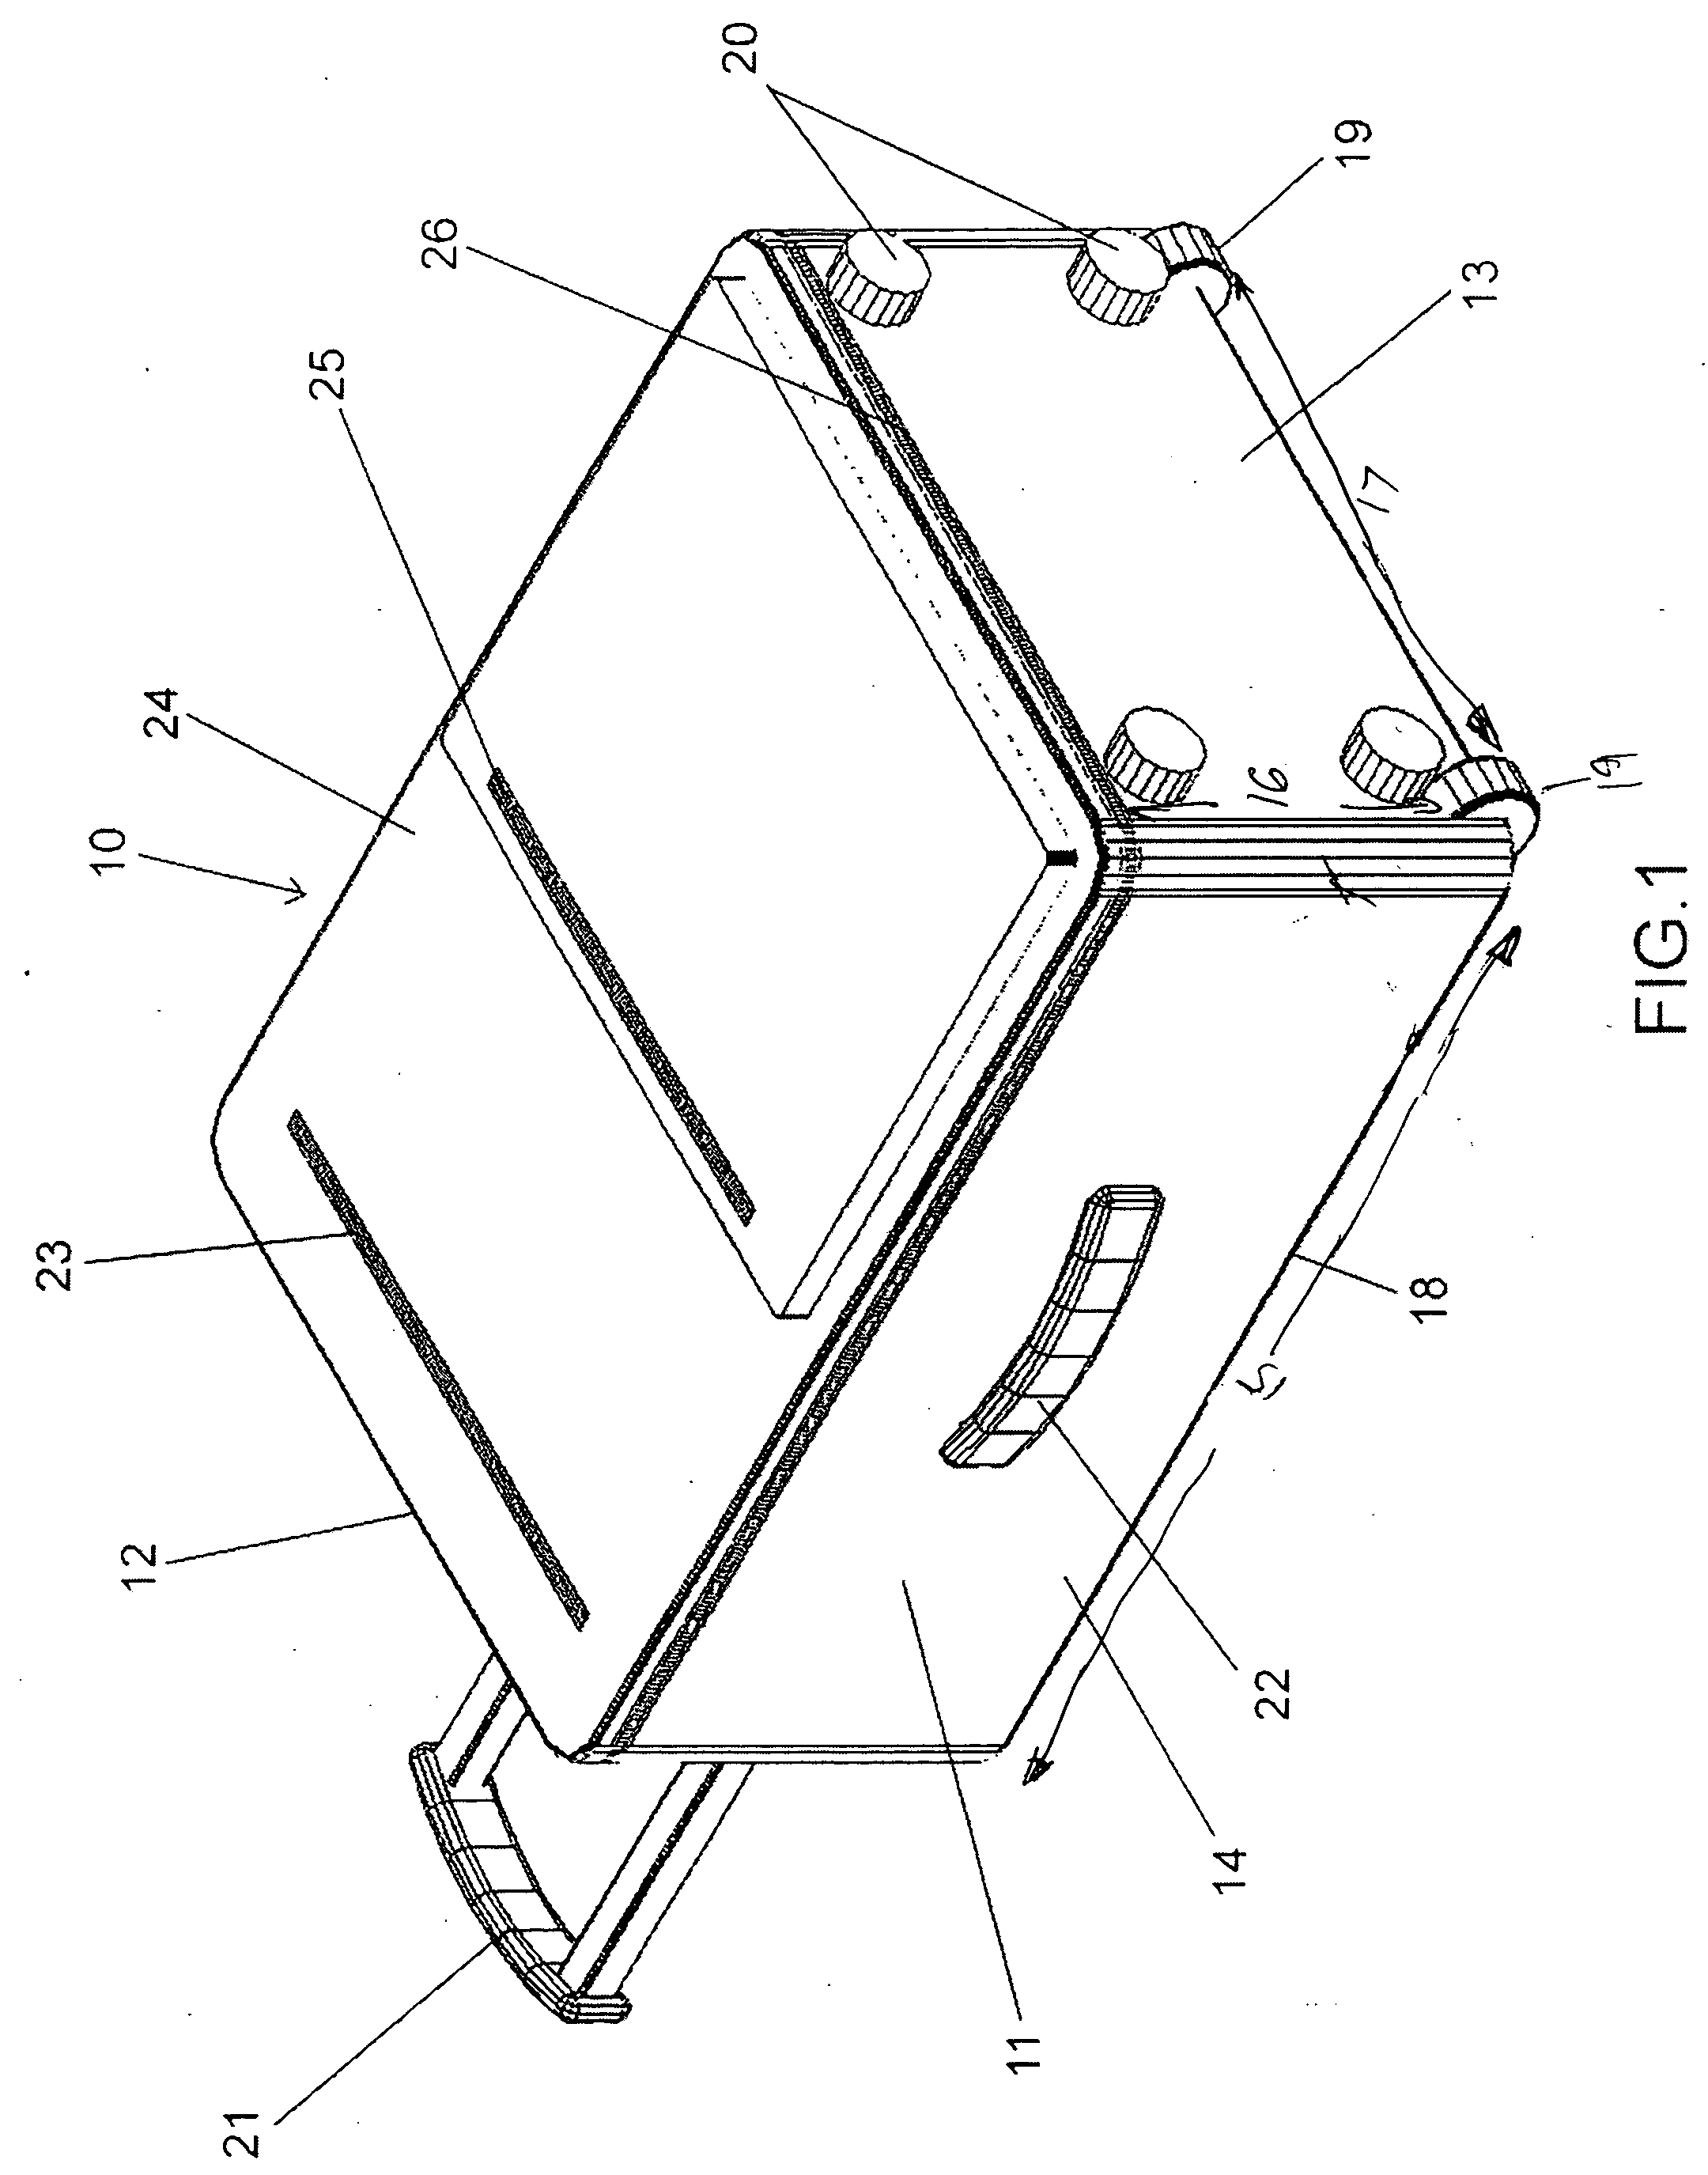 Container with built-in weighing device